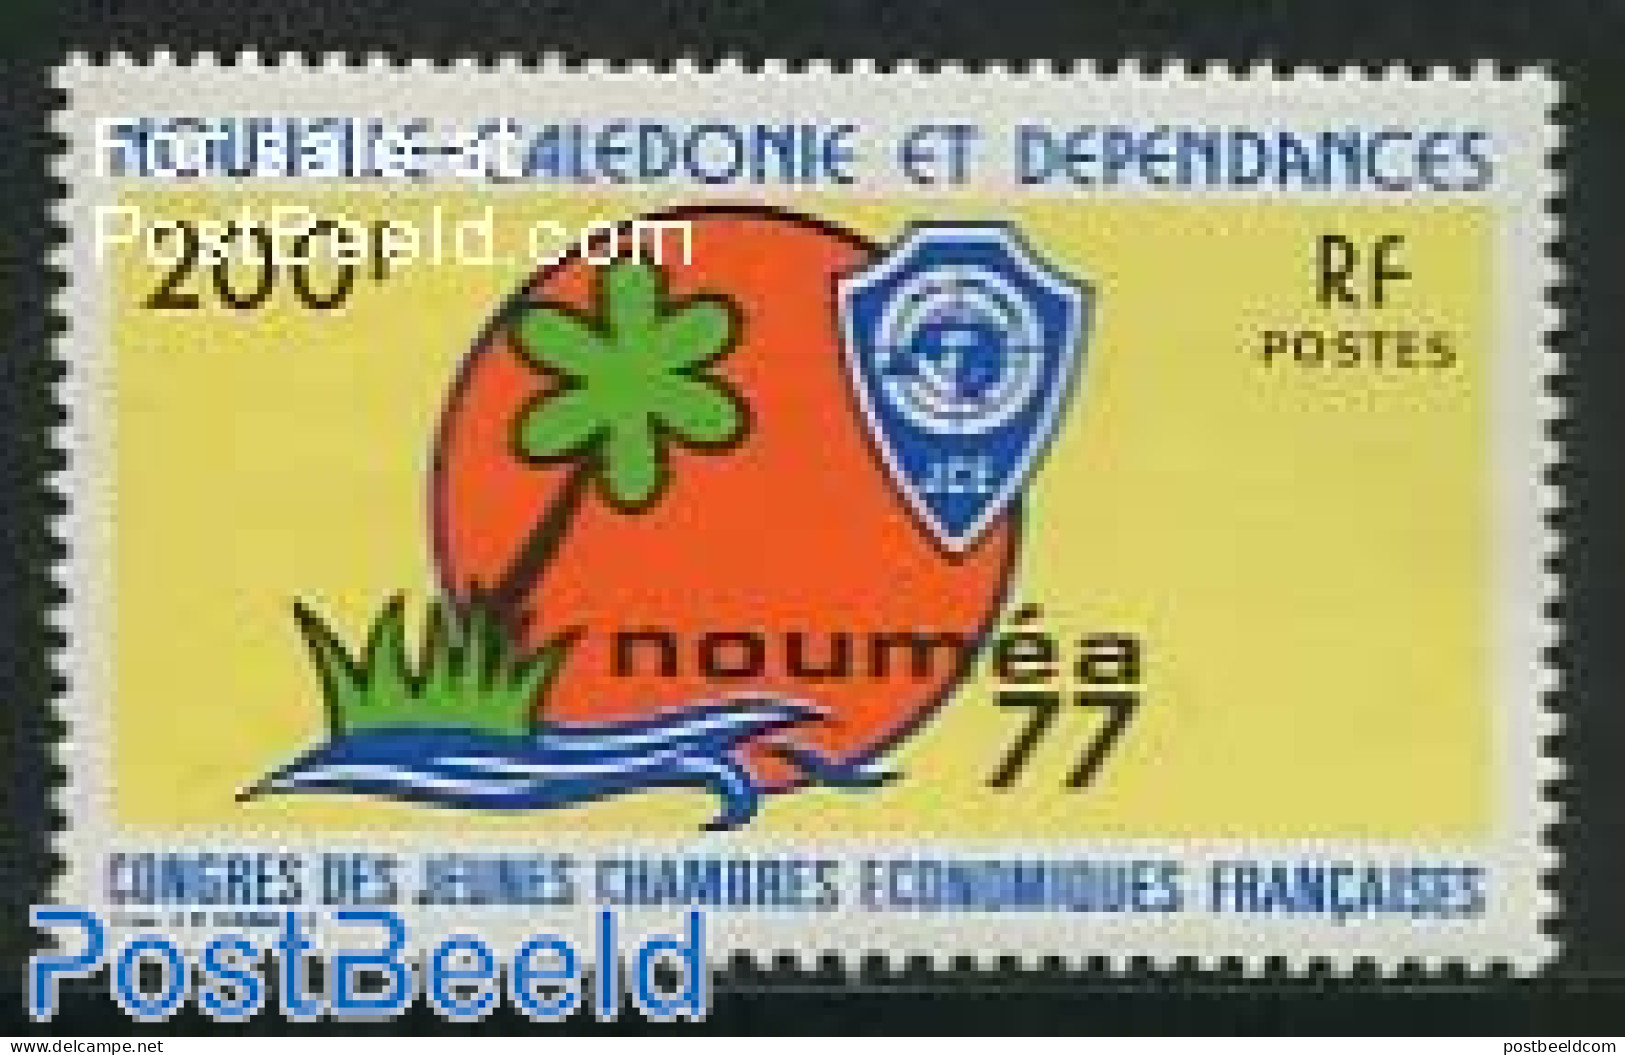 New Caledonia 1977 Junior Chamber Of Commerce 1v, Mint NH, Various - Export & Trade - Nuevos